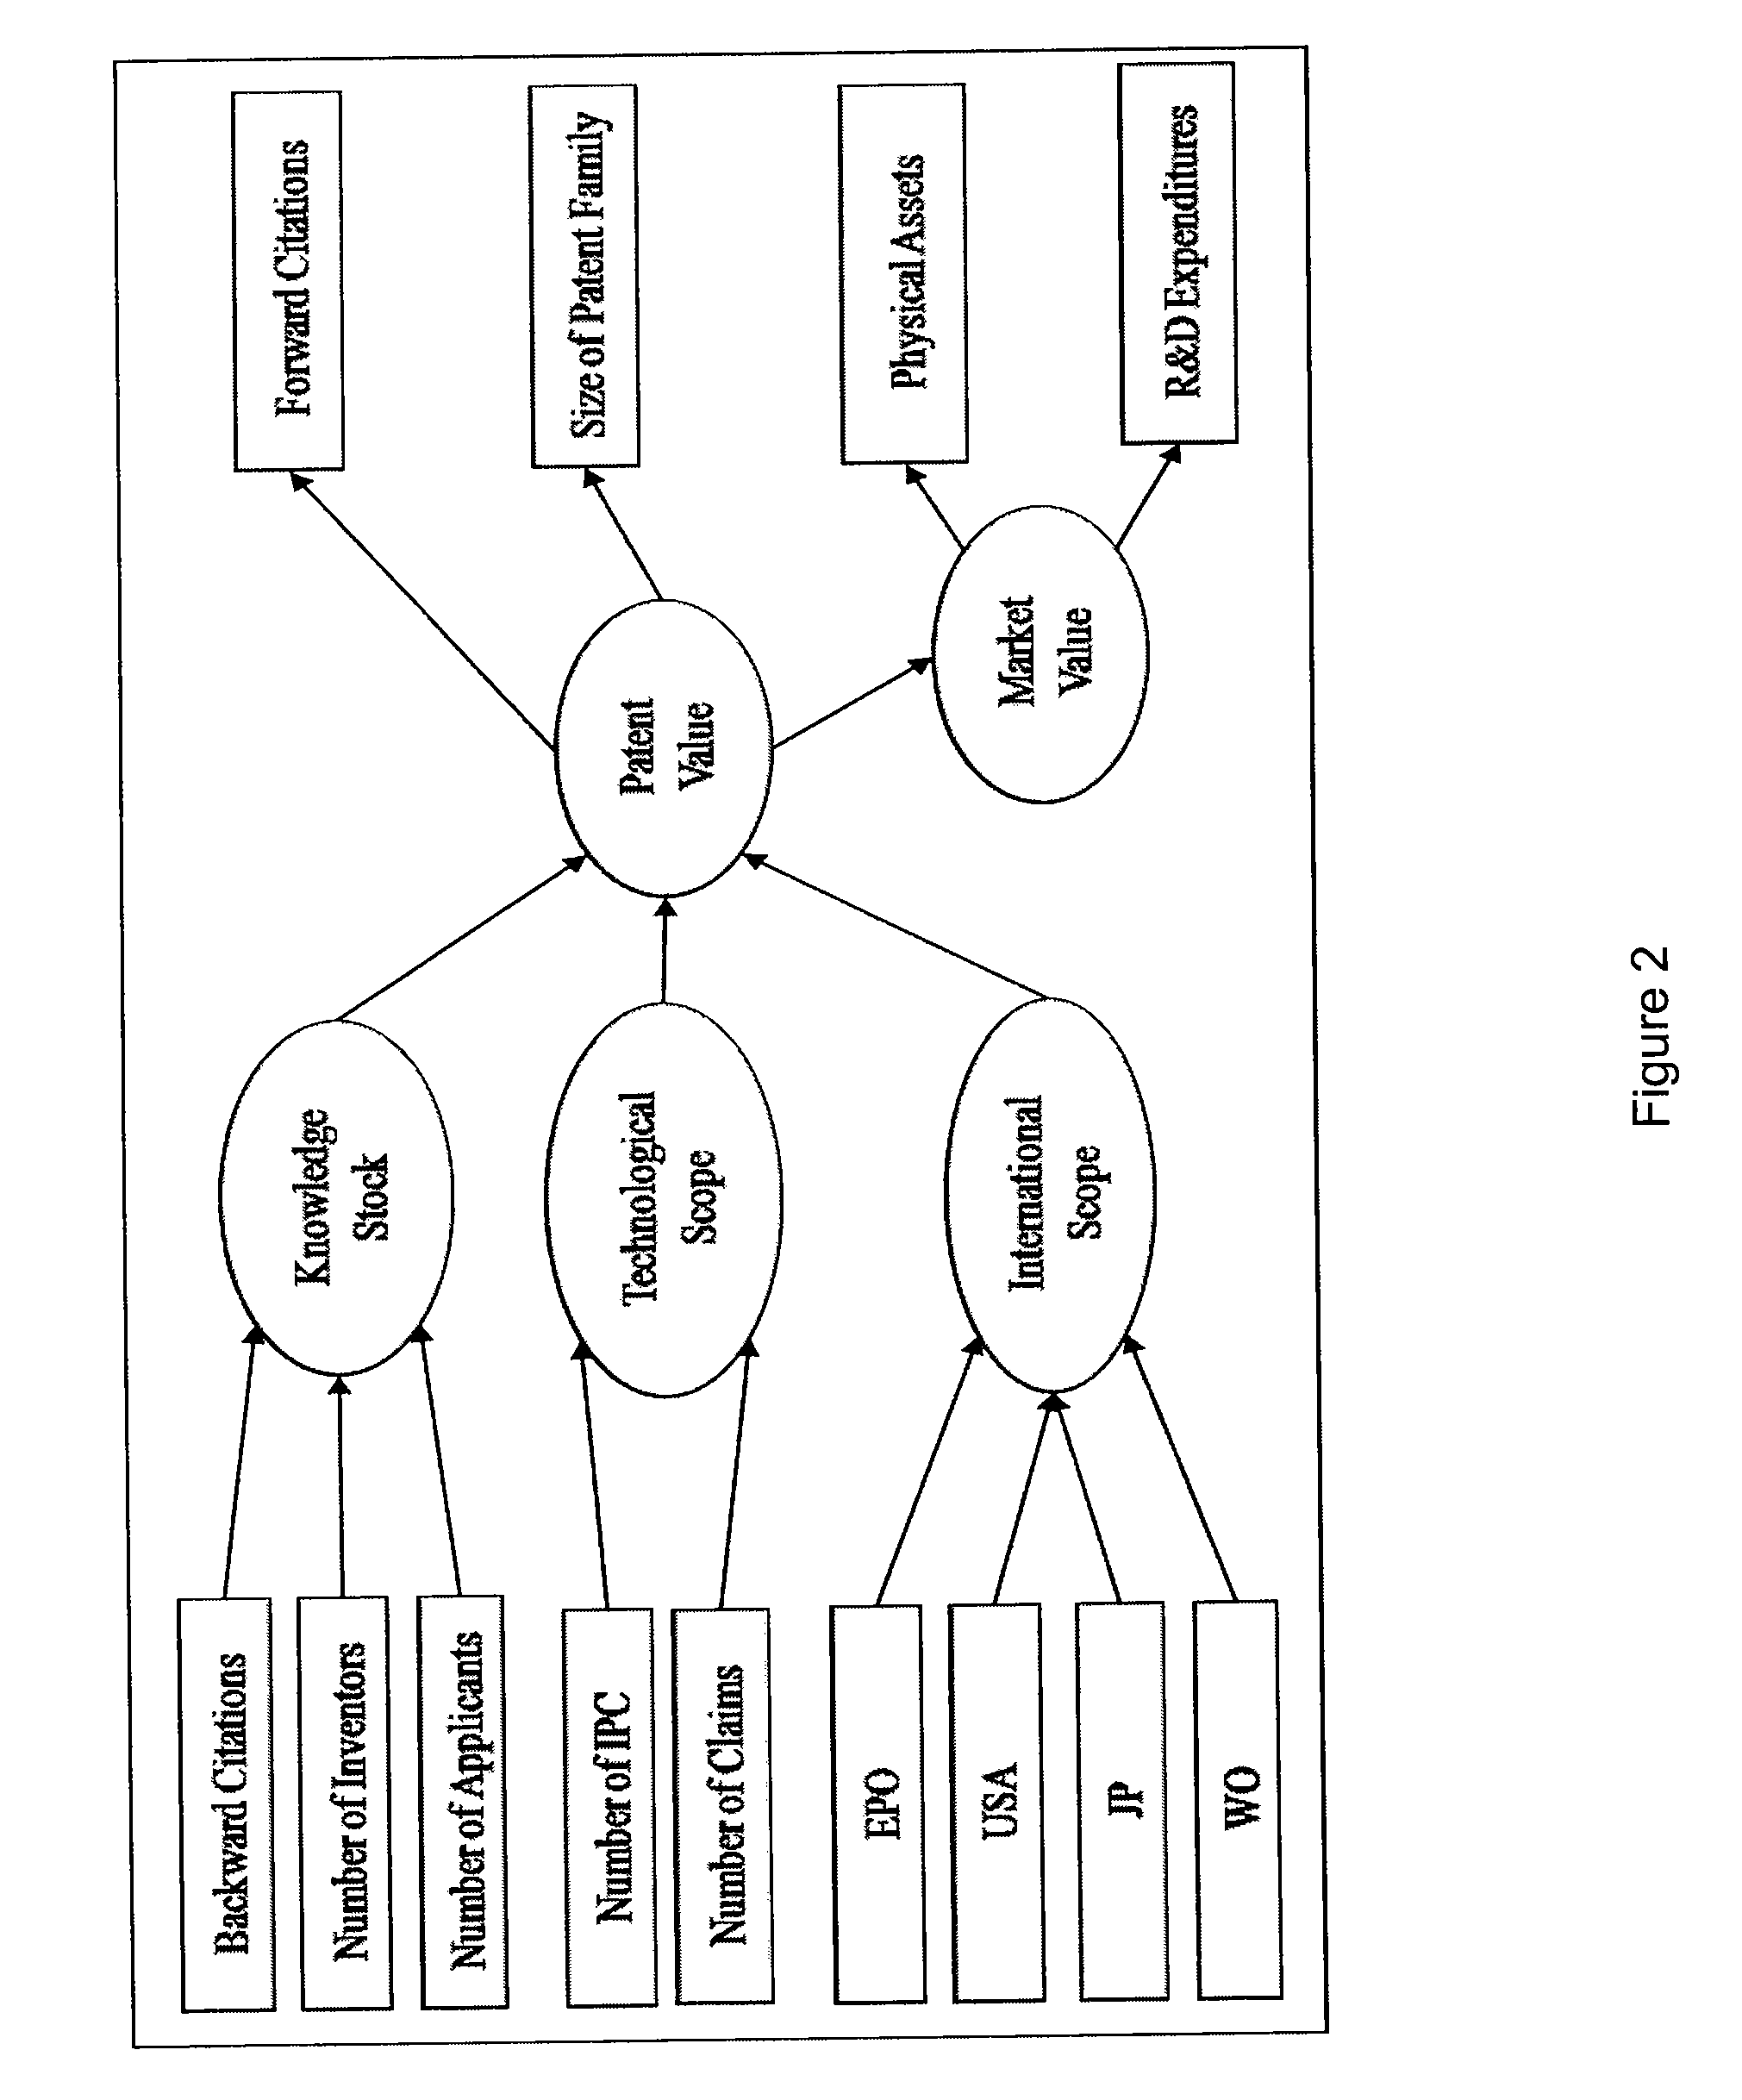 Multidimensional method and computer system for patent and technology portfolio rating and related database